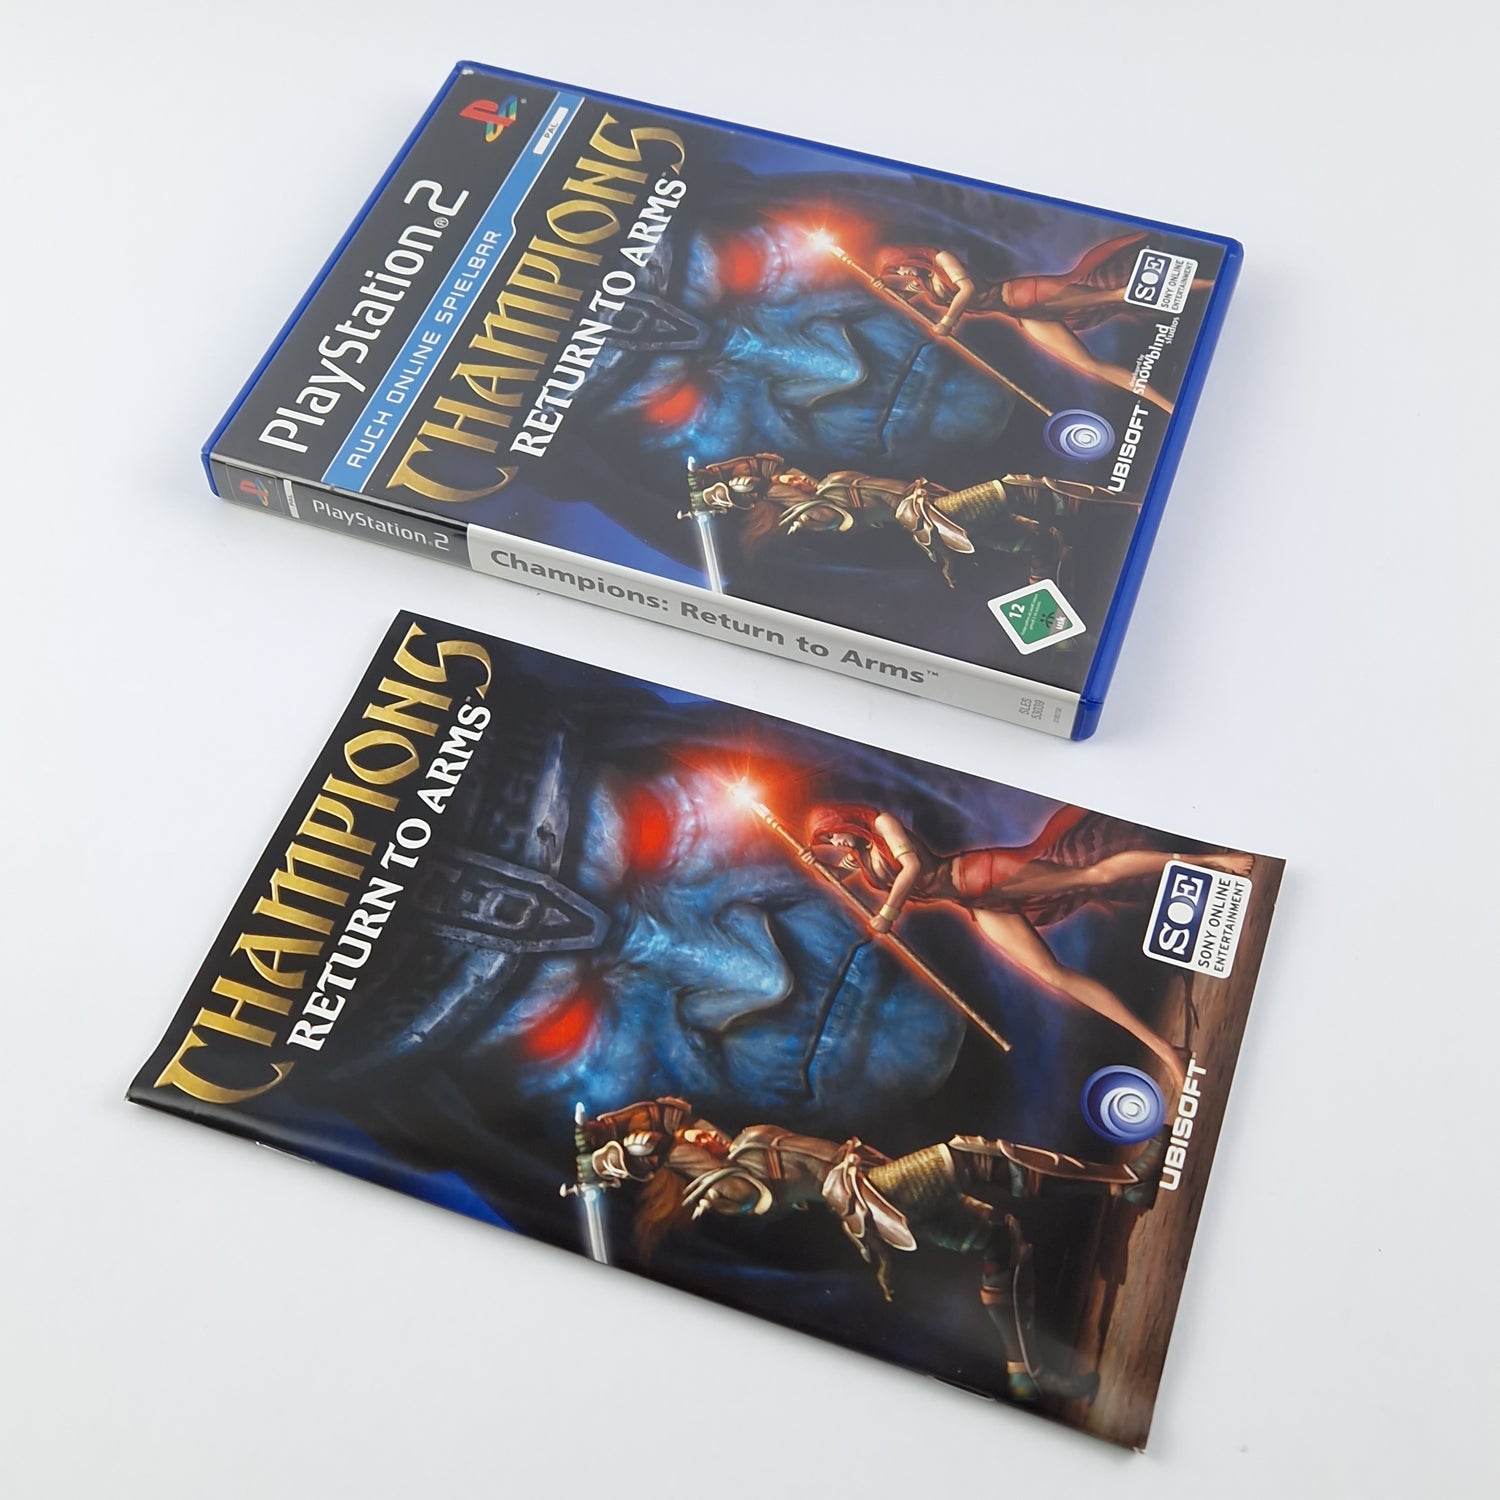 Playstation 2 game: Champions Return to Arms - OVP instructions CD | PS2 PAL game